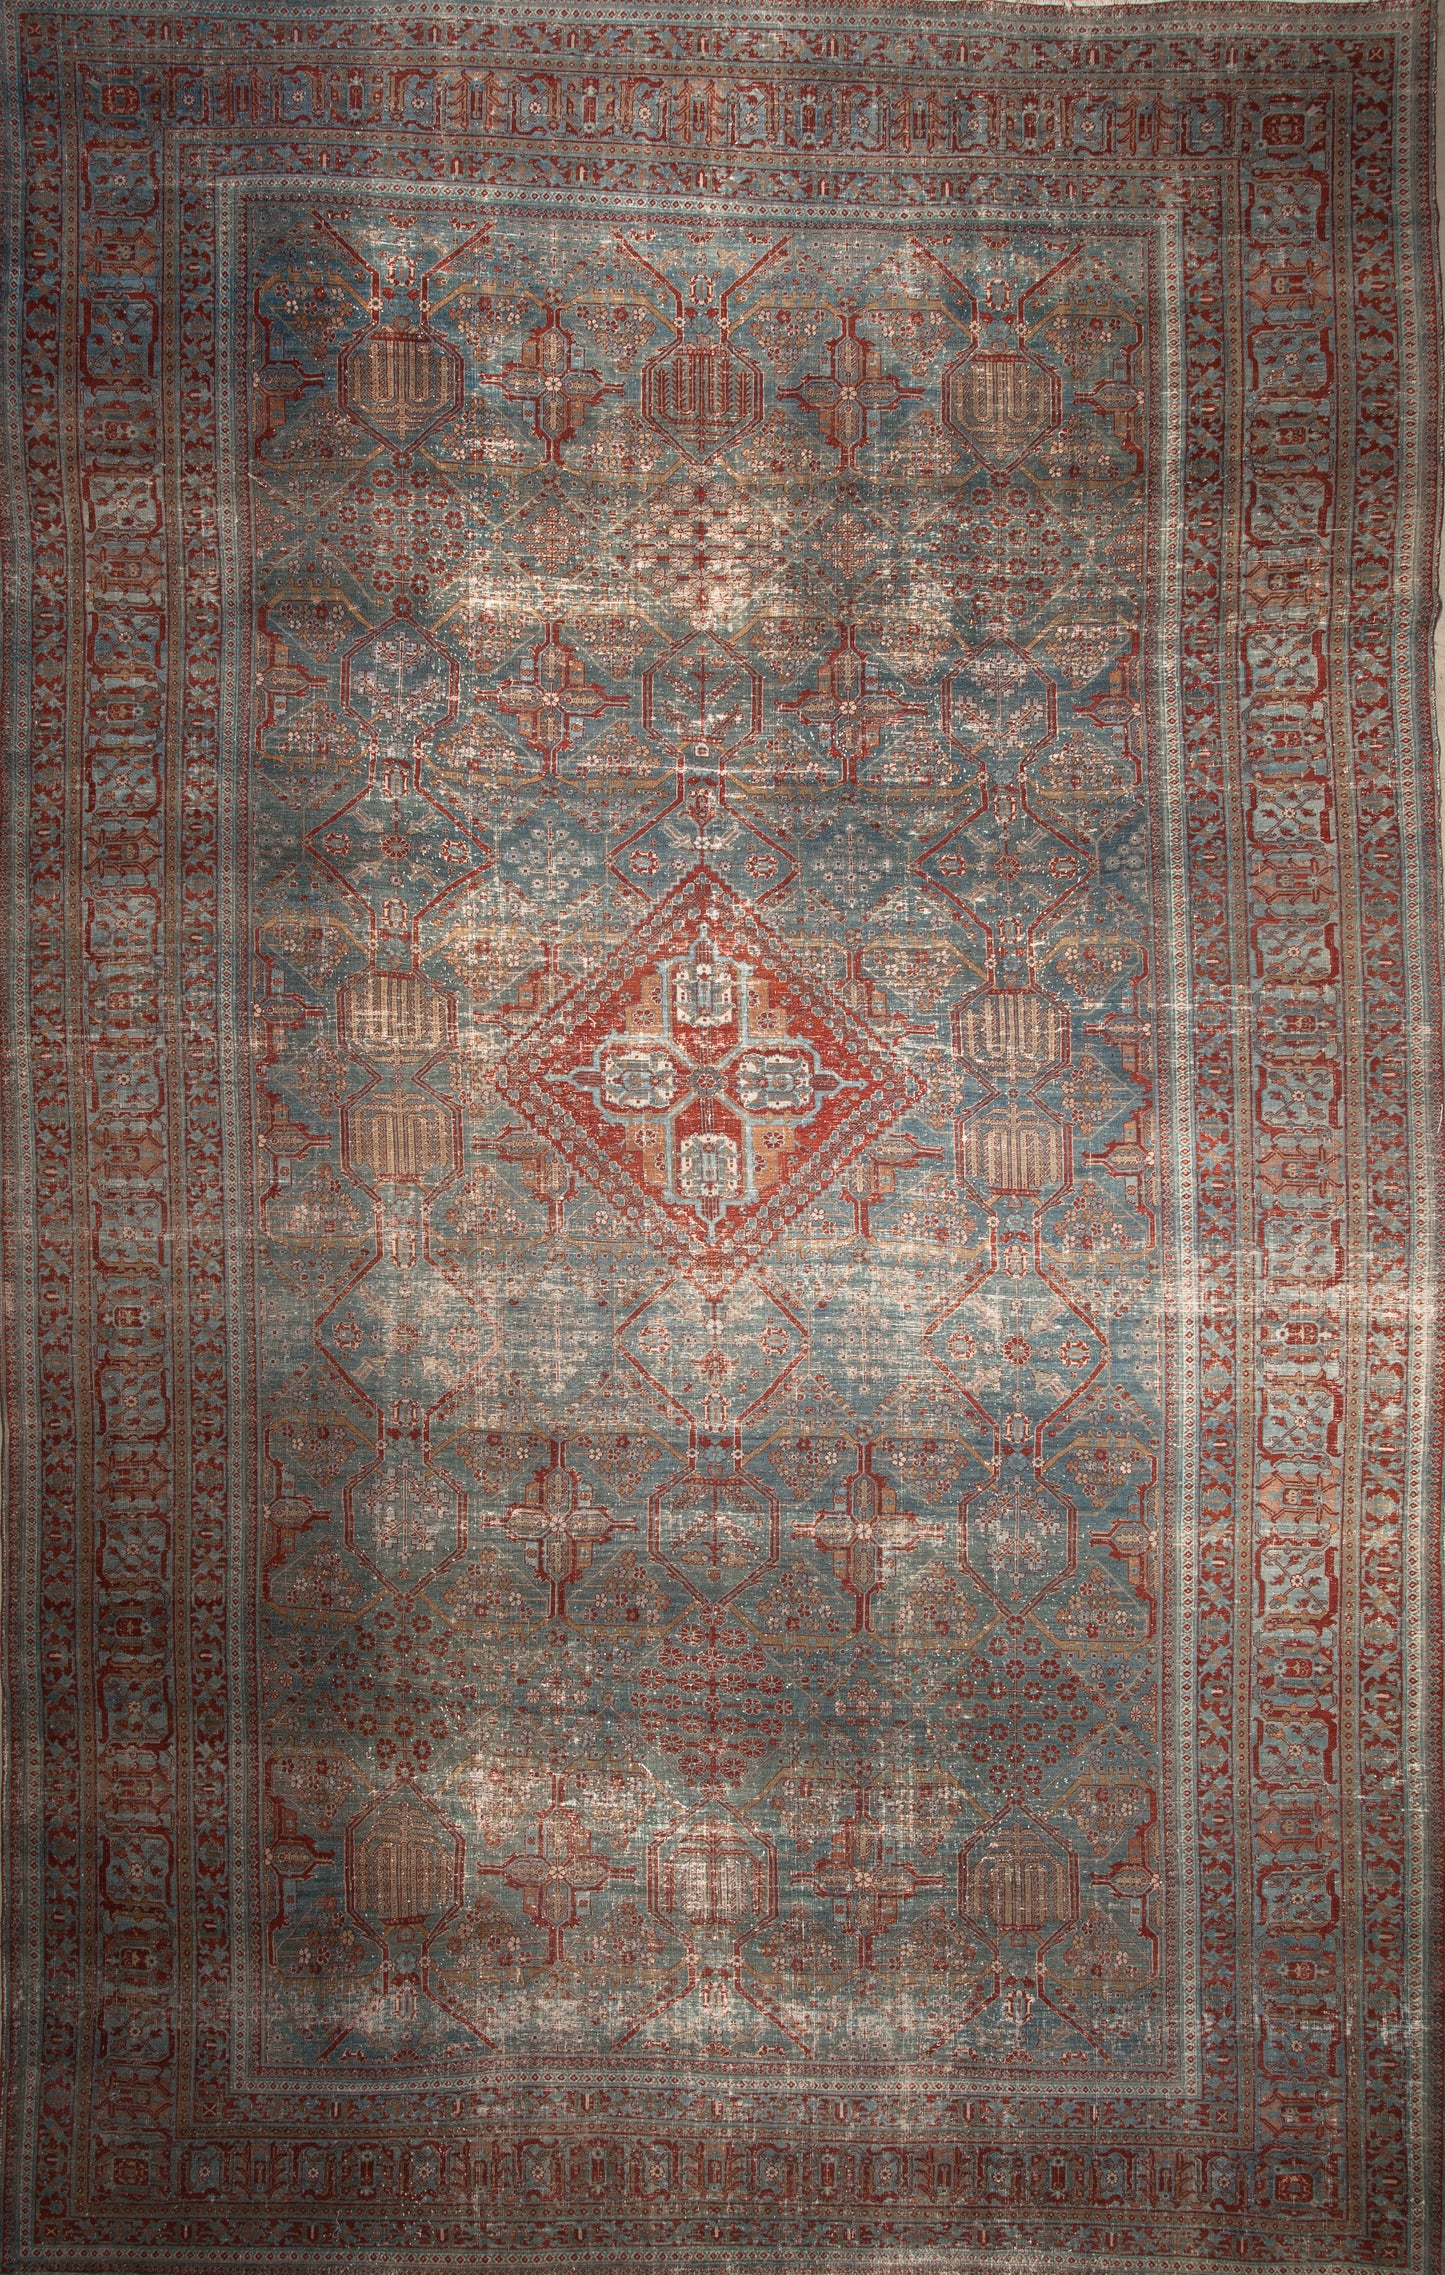 This antique rug is mystical, it holds wellness within its pattern. 